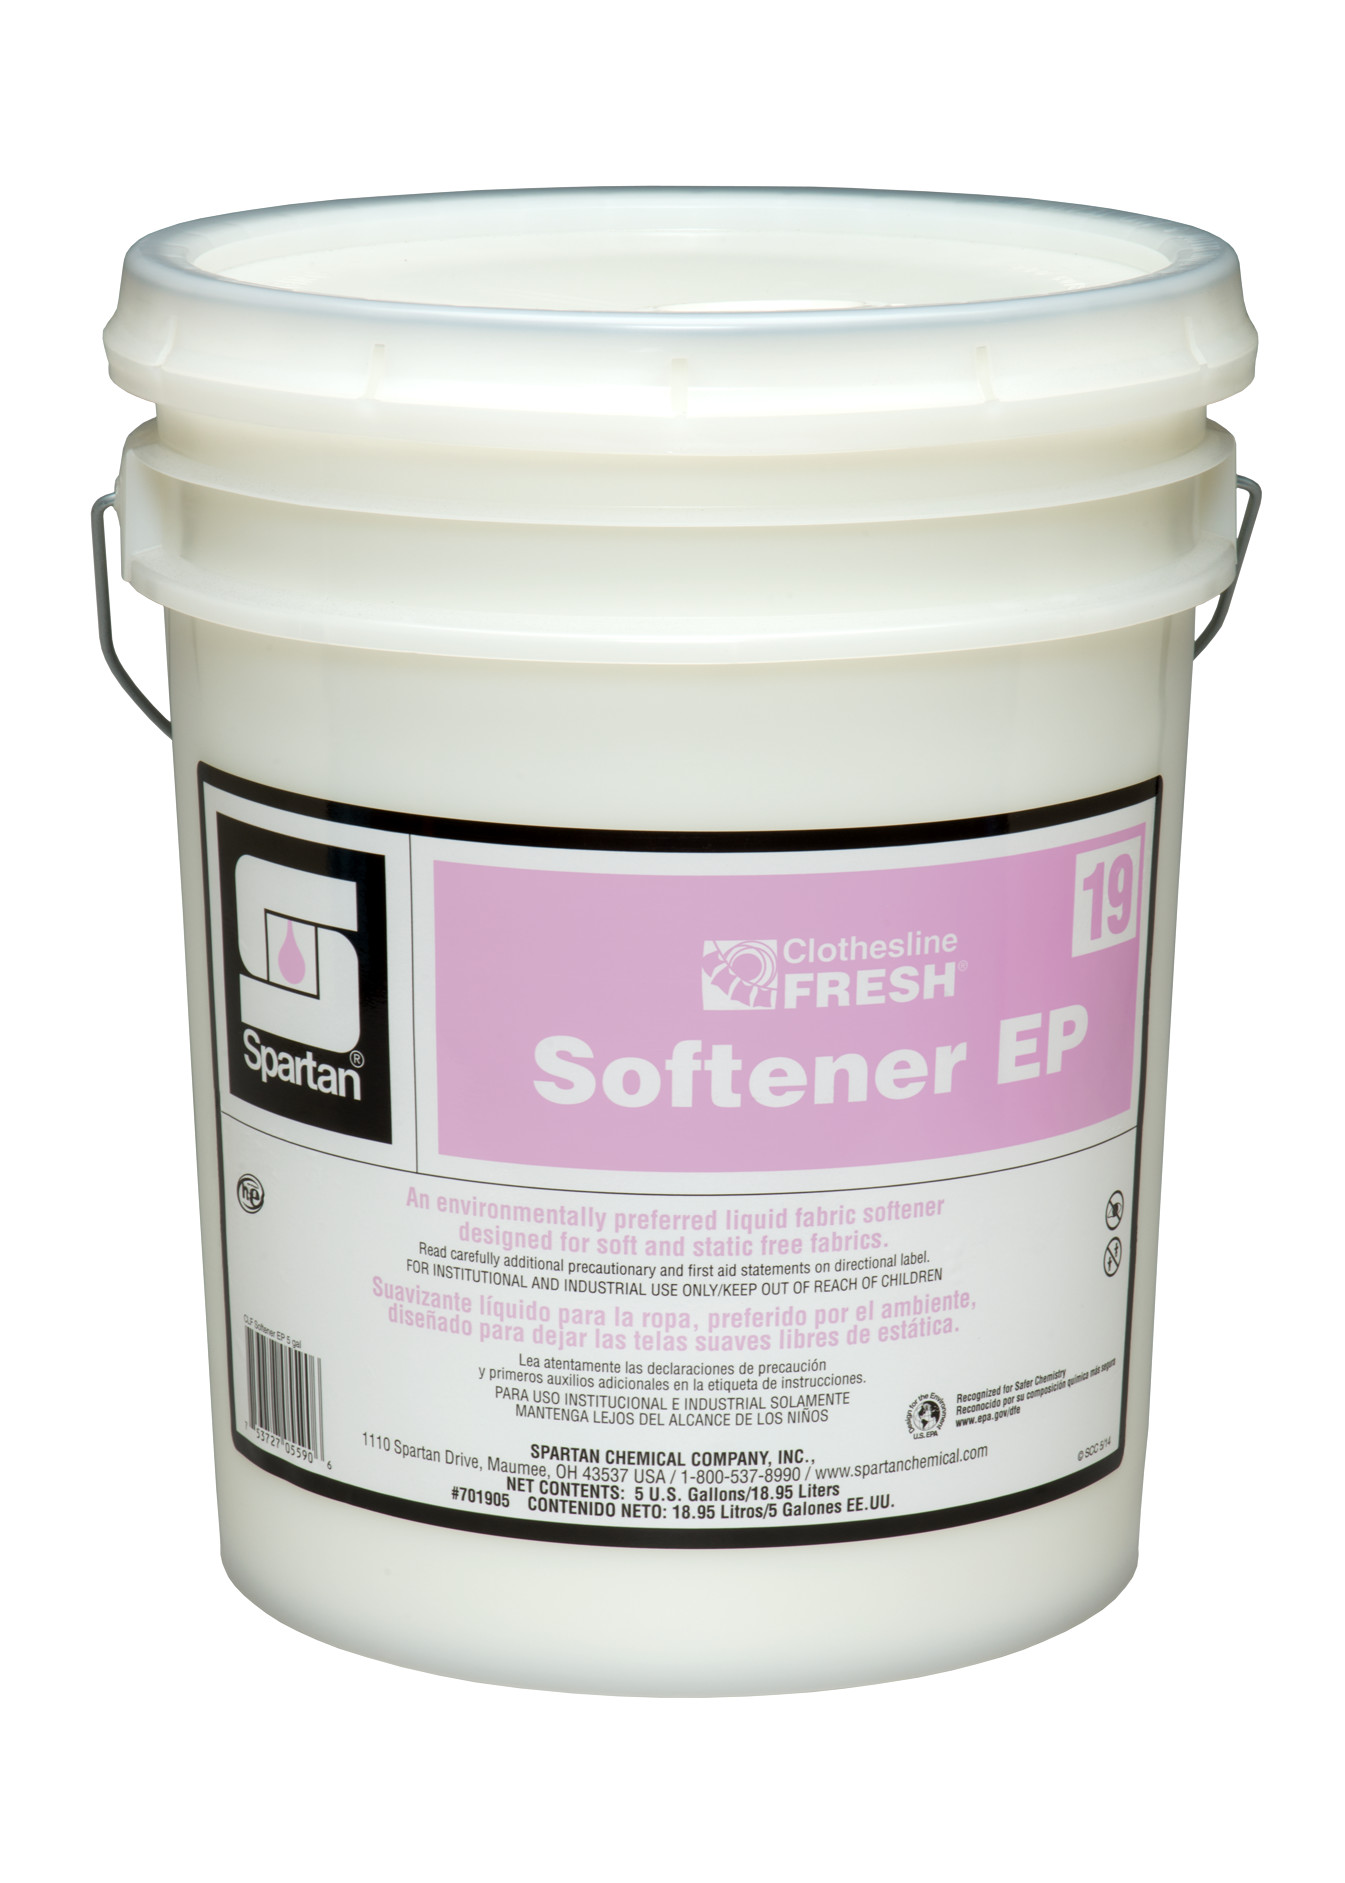 Spartan Chemical Company Clothesline Fresh Softener EP 19, 5 GAL PAIL